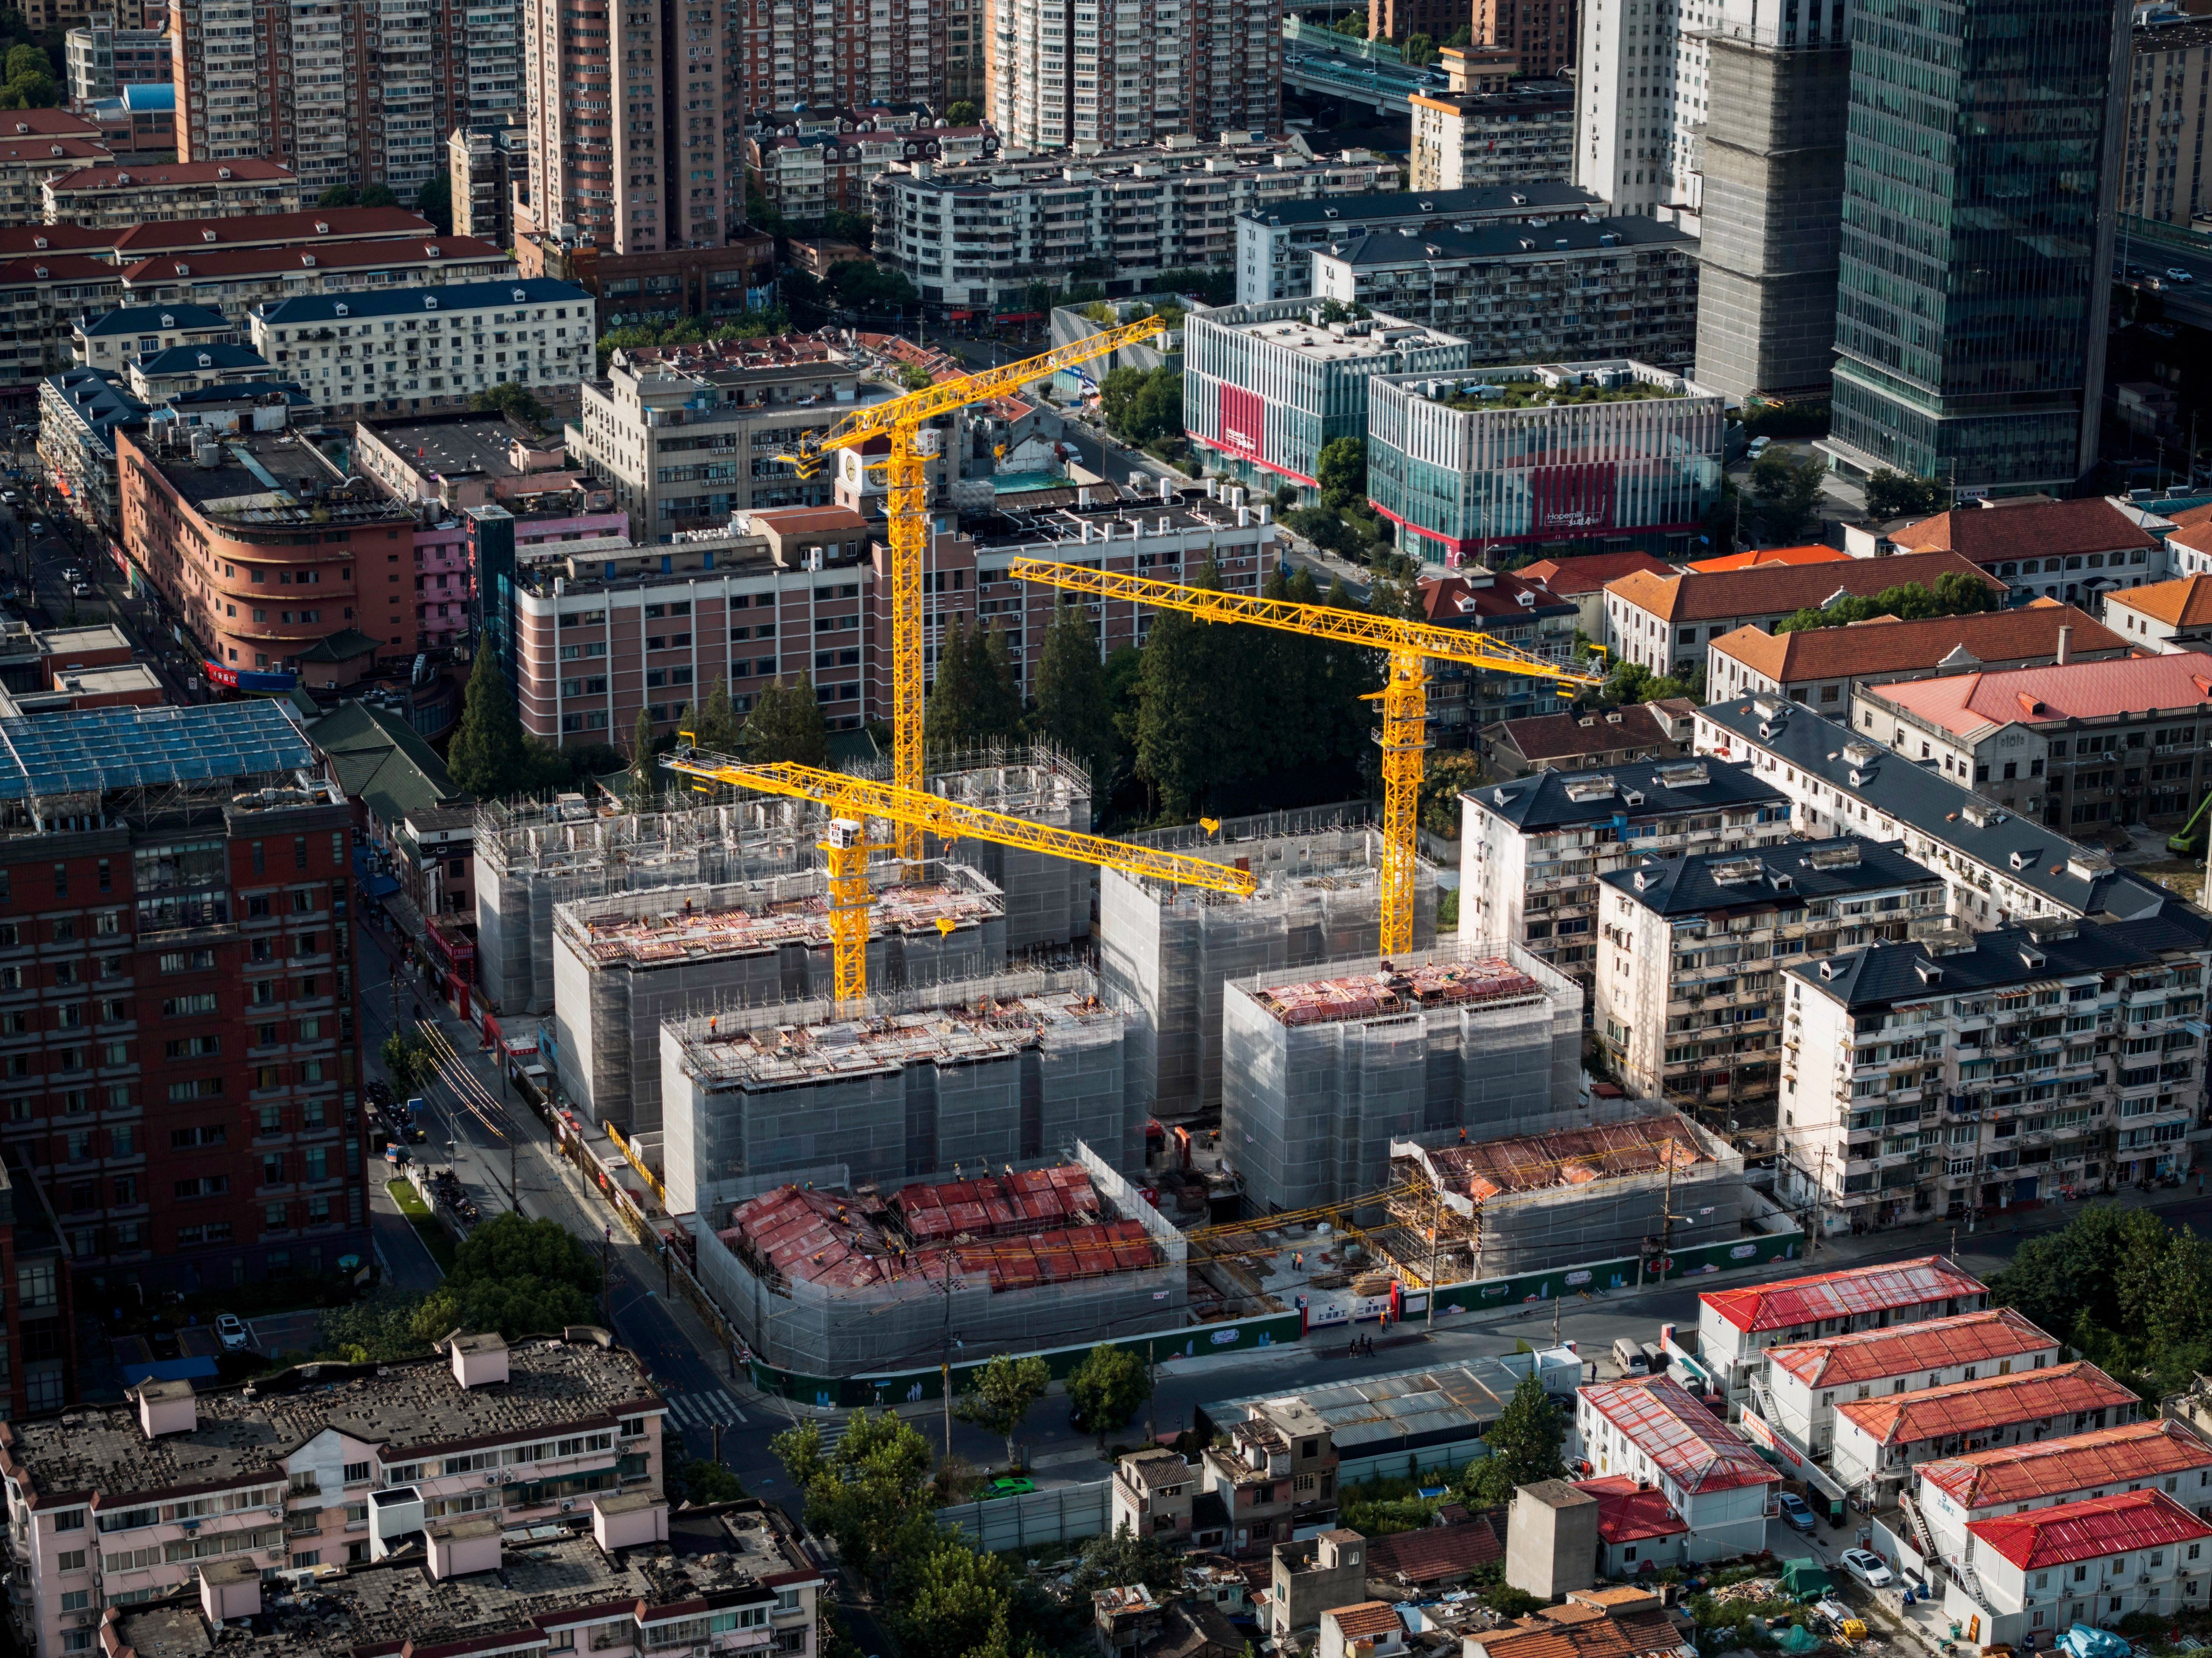 A construction site in Shanghai on August 15. China’s House Price Index fell by 0.1 per cent year on year in July, marking the fifth month of declines, while new home prices dropped by 0.2 per cent on a monthly basis. Photo: EPA-EFE